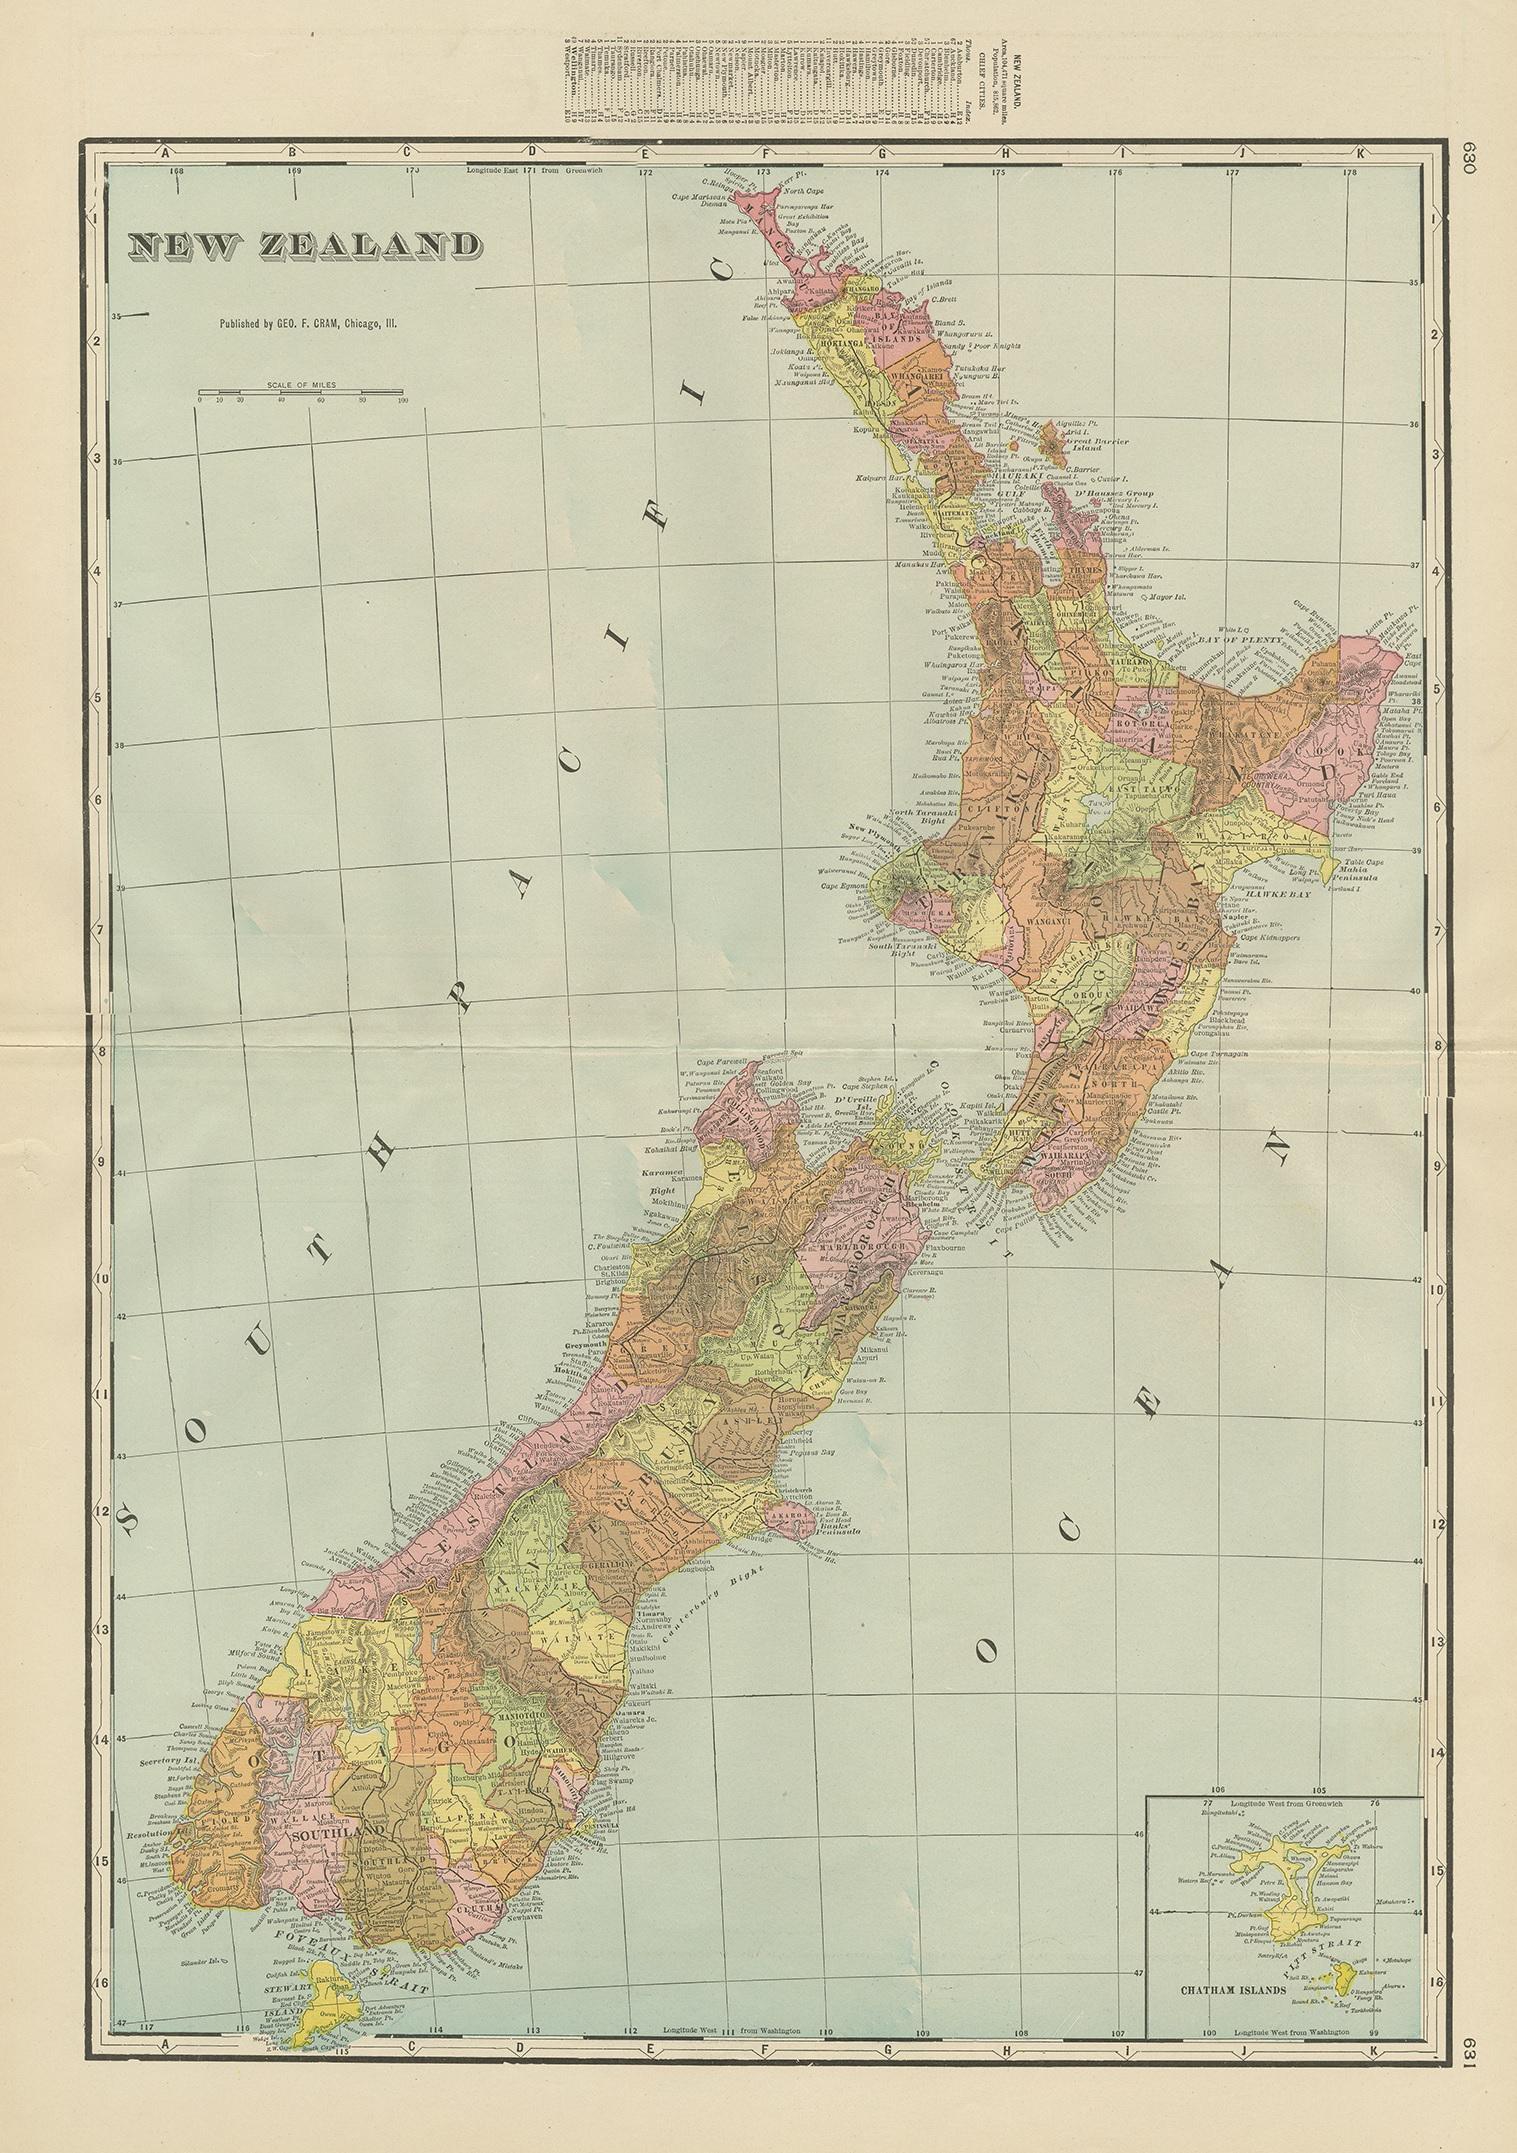 Antique map titled 'New Zealand'. Large map of New Zealand with a small legend of the Chatham Islands. On the verso, a map of the North Polar regions and a map of Tasmania can be found. Published by George F. Cram.